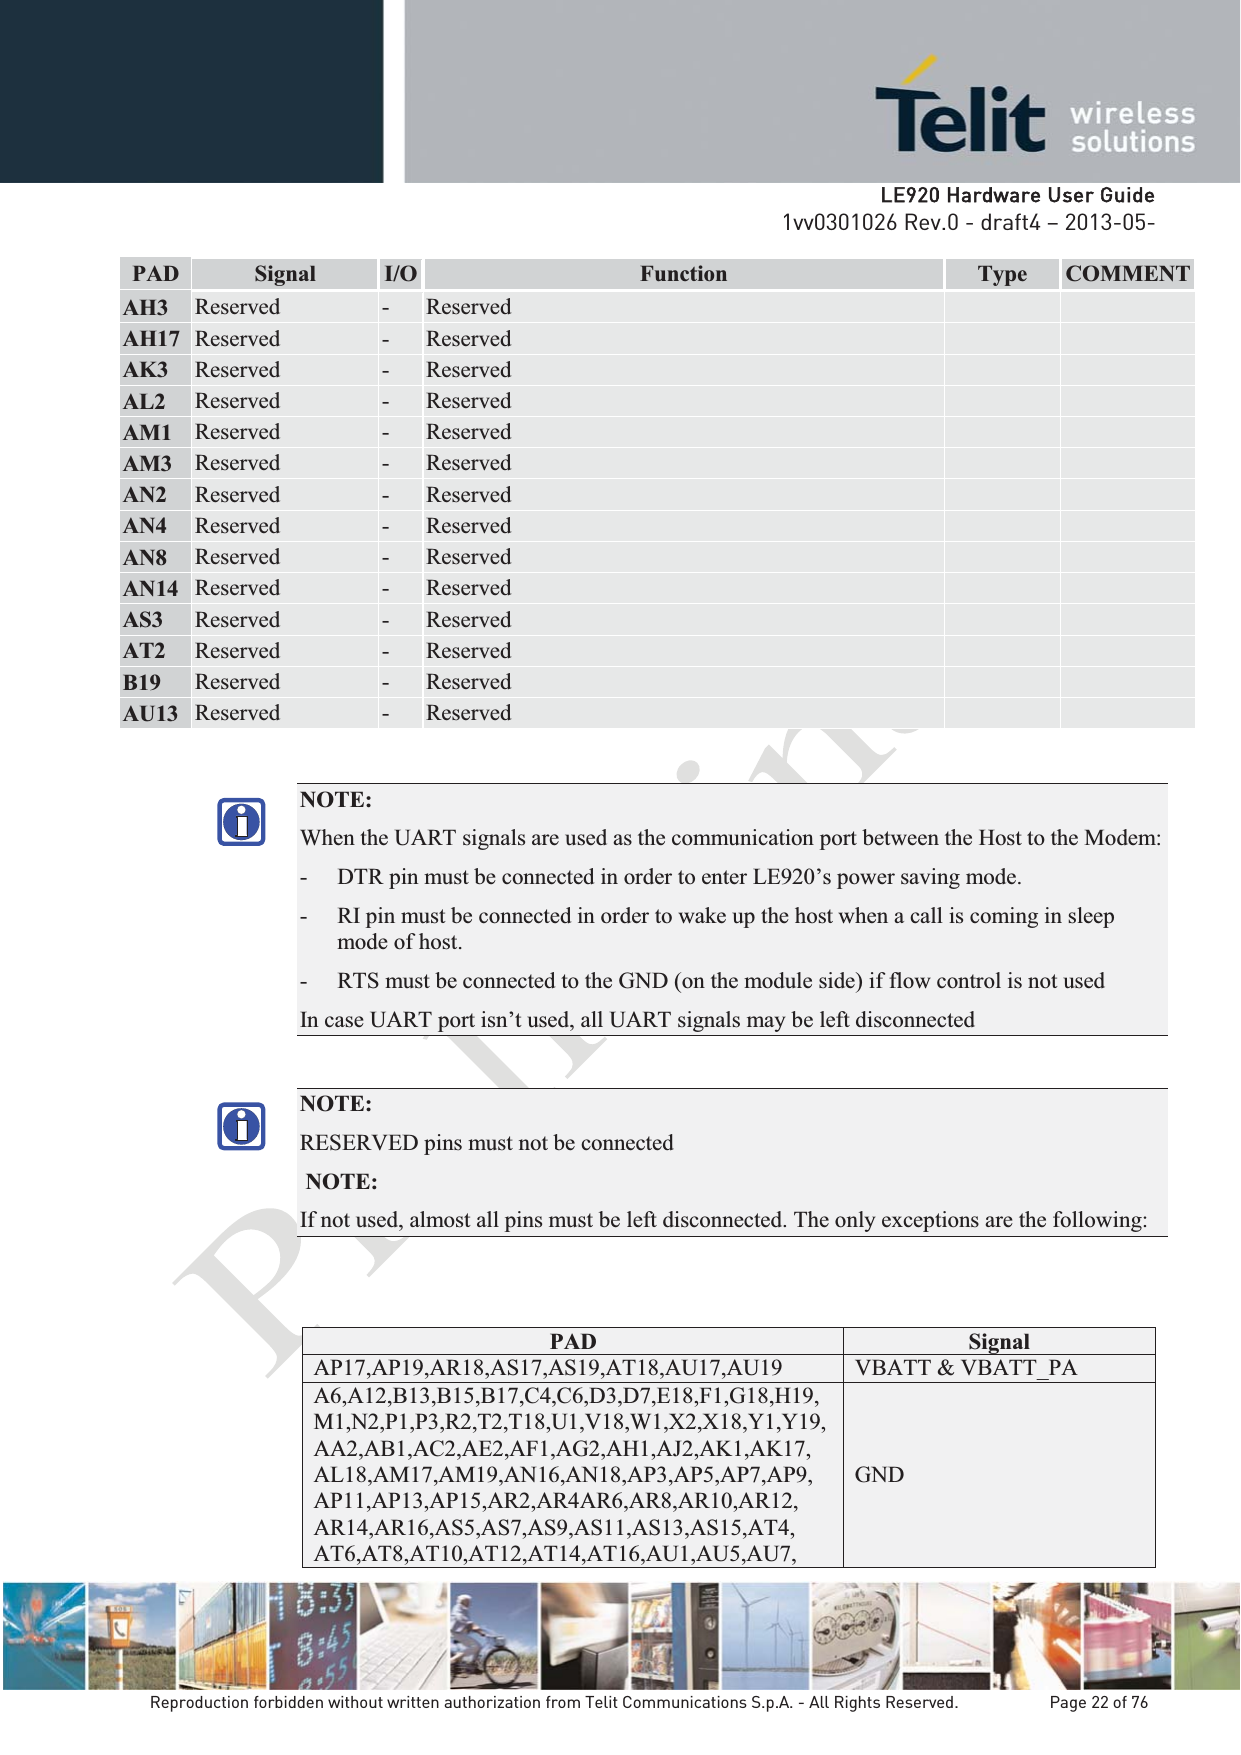   LLE920 Hardware User Guide1vv0301026 Rev.0 - draft4 – 2013-05-Reproduction forbidden without written authorization from Telit Communications S.p.A. - All Rights Reserved.    Page 22 of 76 PAD Signal I/O Function Type COMMENTAH3  Reserved  -  Reserved     AH17  Reserved  -  Reserved     AK3  Reserved  -  Reserved     AL2  Reserved  -  Reserved     AM1  Reserved  -  Reserved     AM3  Reserved  -  Reserved     AN2  Reserved  -  Reserved     AN4  Reserved  -  Reserved     AN8  Reserved  -  Reserved     AN14  Reserved  -  Reserved     AS3  Reserved  -  Reserved     AT2  Reserved  -  Reserved     B19  Reserved  -  Reserved     AU13  Reserved  -  Reserved     NOTE:  When the UART signals are used as the communication port between the Host to the Modem: - DTR pin must be connected in order to enter LE920’s power saving mode. - RI pin must be connected in order to wake up the host when a call is coming in sleep mode of host. - RTS must be connected to the GND (on the module side) if flow control is not used  In case UART port isn’t used, all UART signals may be left disconnected NOTE:  RESERVED pins must not be connectedNOTE: If not used, almost all pins must be left disconnected. The only exceptions are the following: PAD  Signal AP17,AP19,AR18,AS17,AS19,AT18,AU17,AU19  VBATT &amp; VBATT_PA A6,A12,B13,B15,B17,C4,C6,D3,D7,E18,F1,G18,H19,M1,N2,P1,P3,R2,T2,T18,U1,V18,W1,X2,X18,Y1,Y19,AA2,AB1,AC2,AE2,AF1,AG2,AH1,AJ2,AK1,AK17, AL18,AM17,AM19,AN16,AN18,AP3,AP5,AP7,AP9, AP11,AP13,AP15,AR2,AR4AR6,AR8,AR10,AR12, AR14,AR16,AS5,AS7,AS9,AS11,AS13,AS15,AT4, AT6,AT8,AT10,AT12,AT14,AT16,AU1,AU5,AU7, GND 